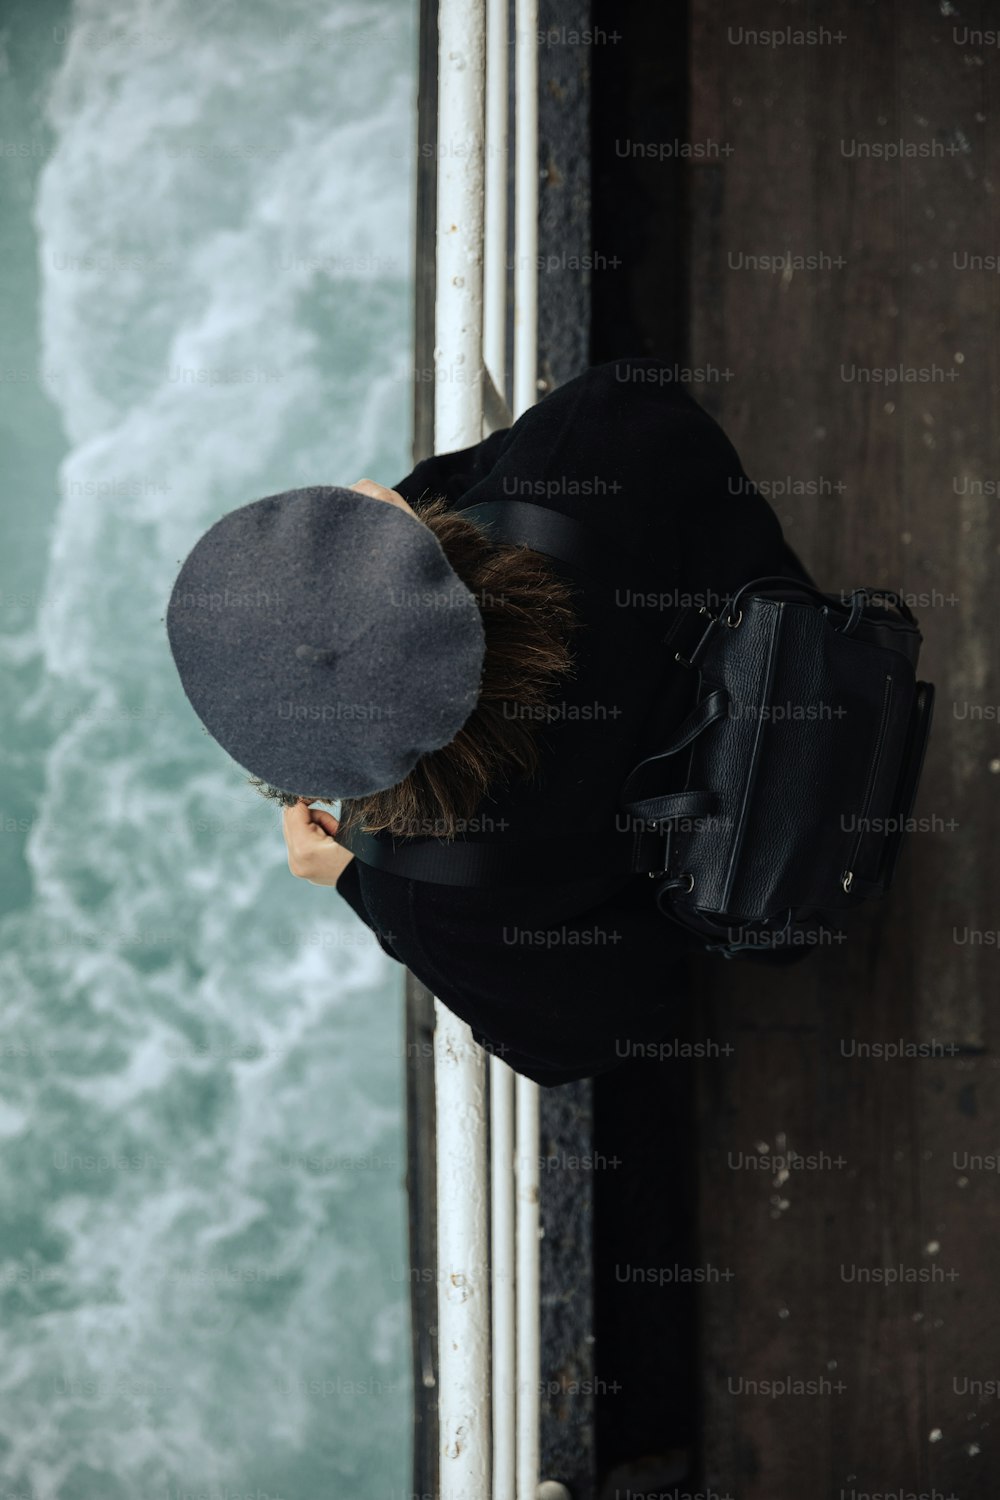 a person wearing a hat looking down at the water